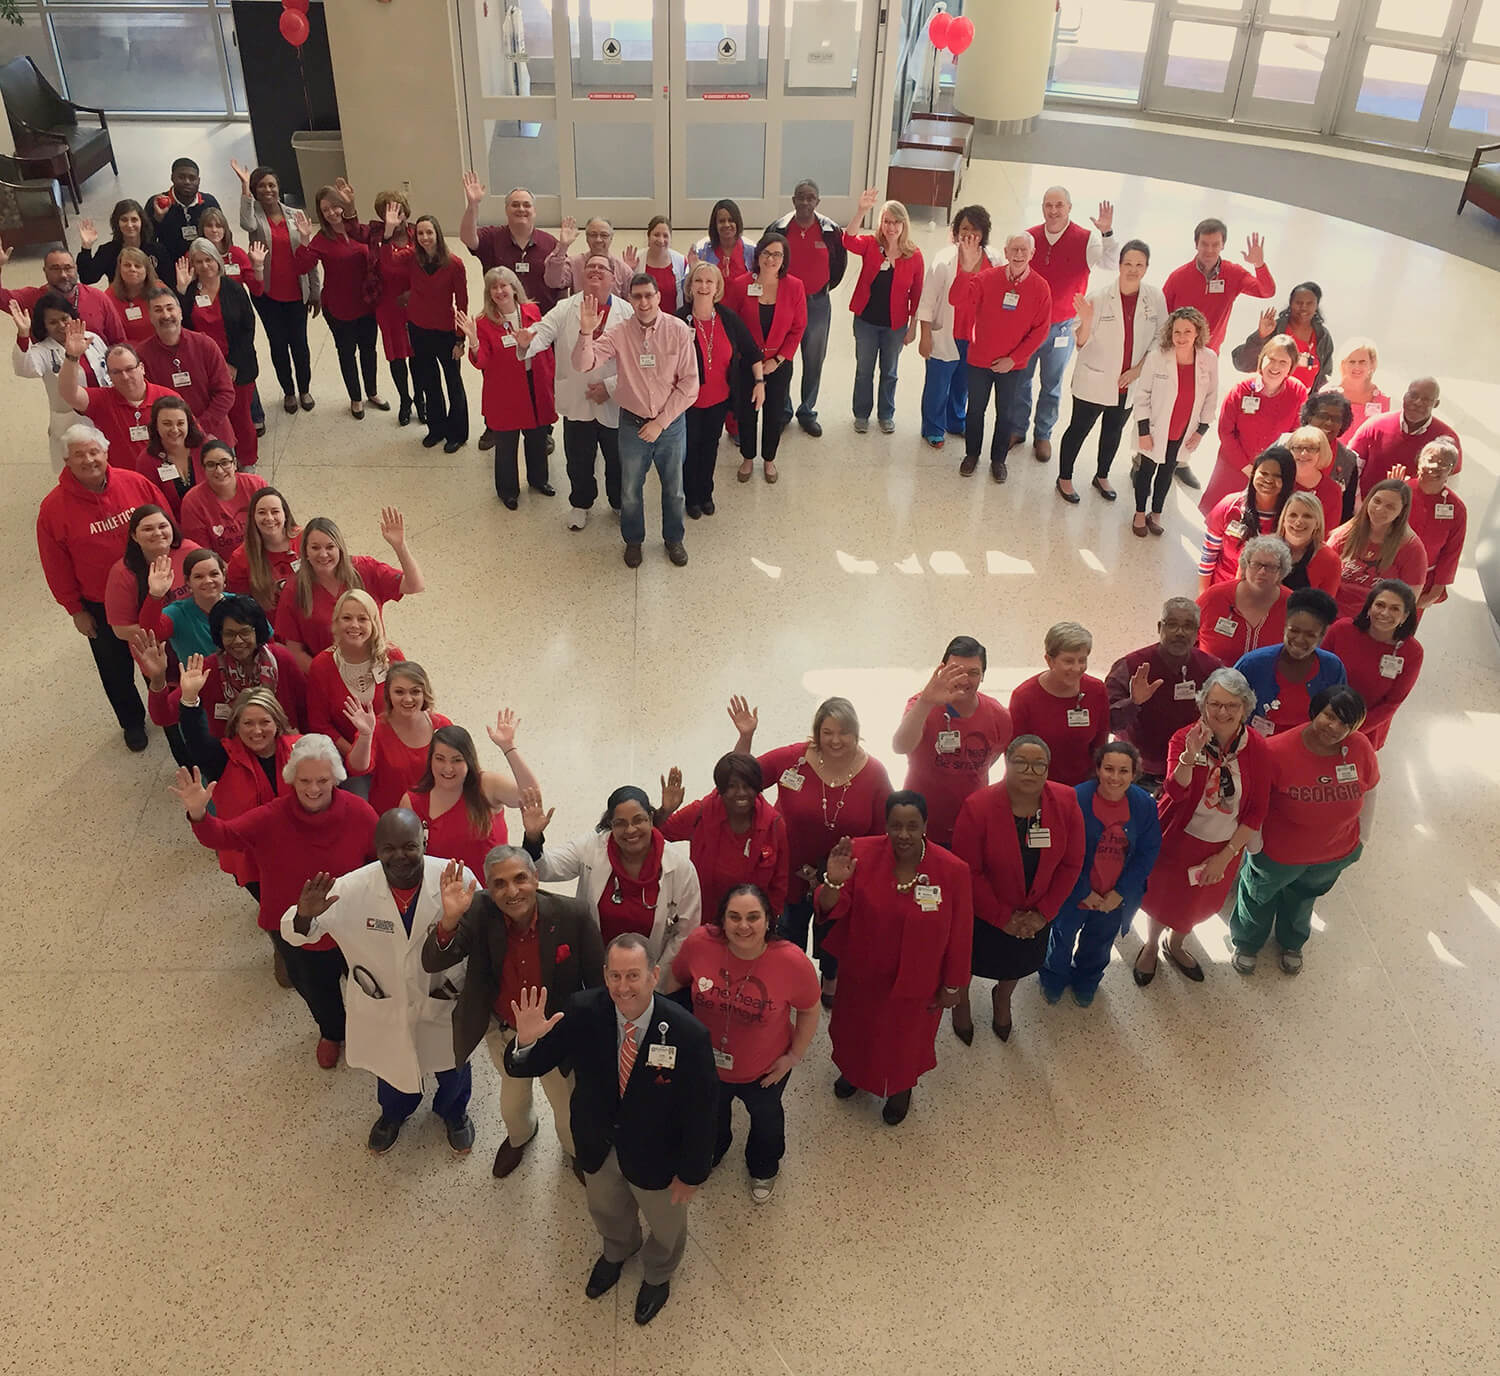 Wear Red Day at St. Francis Hospital